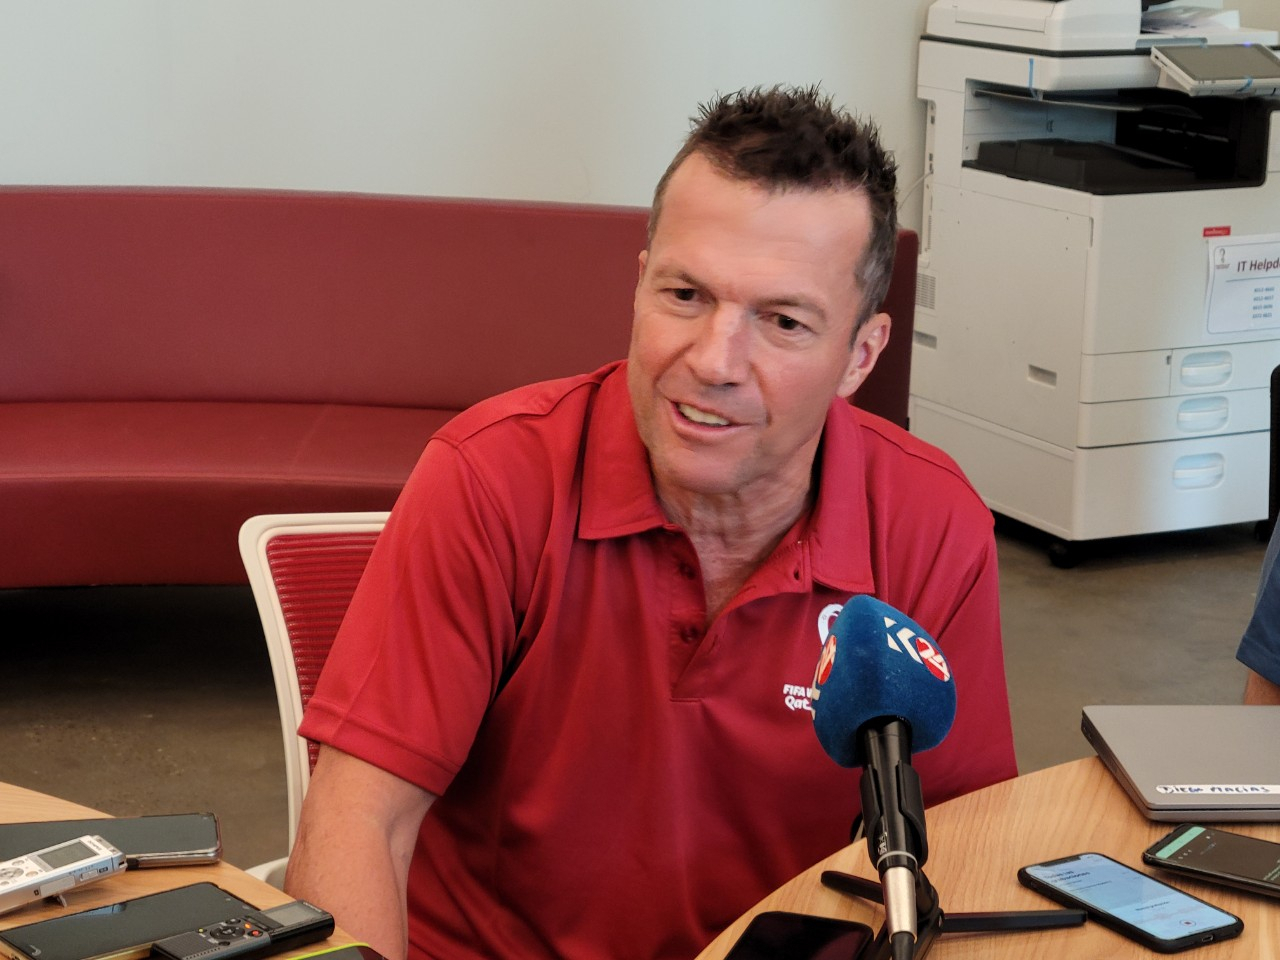 Former German football star and World Cup ambassador Lothar Matthaus speaks with reporters during a media roundtable during the FIFA World Cup at the Host Country Media Centre in Doha on Monday. (Yonhap)